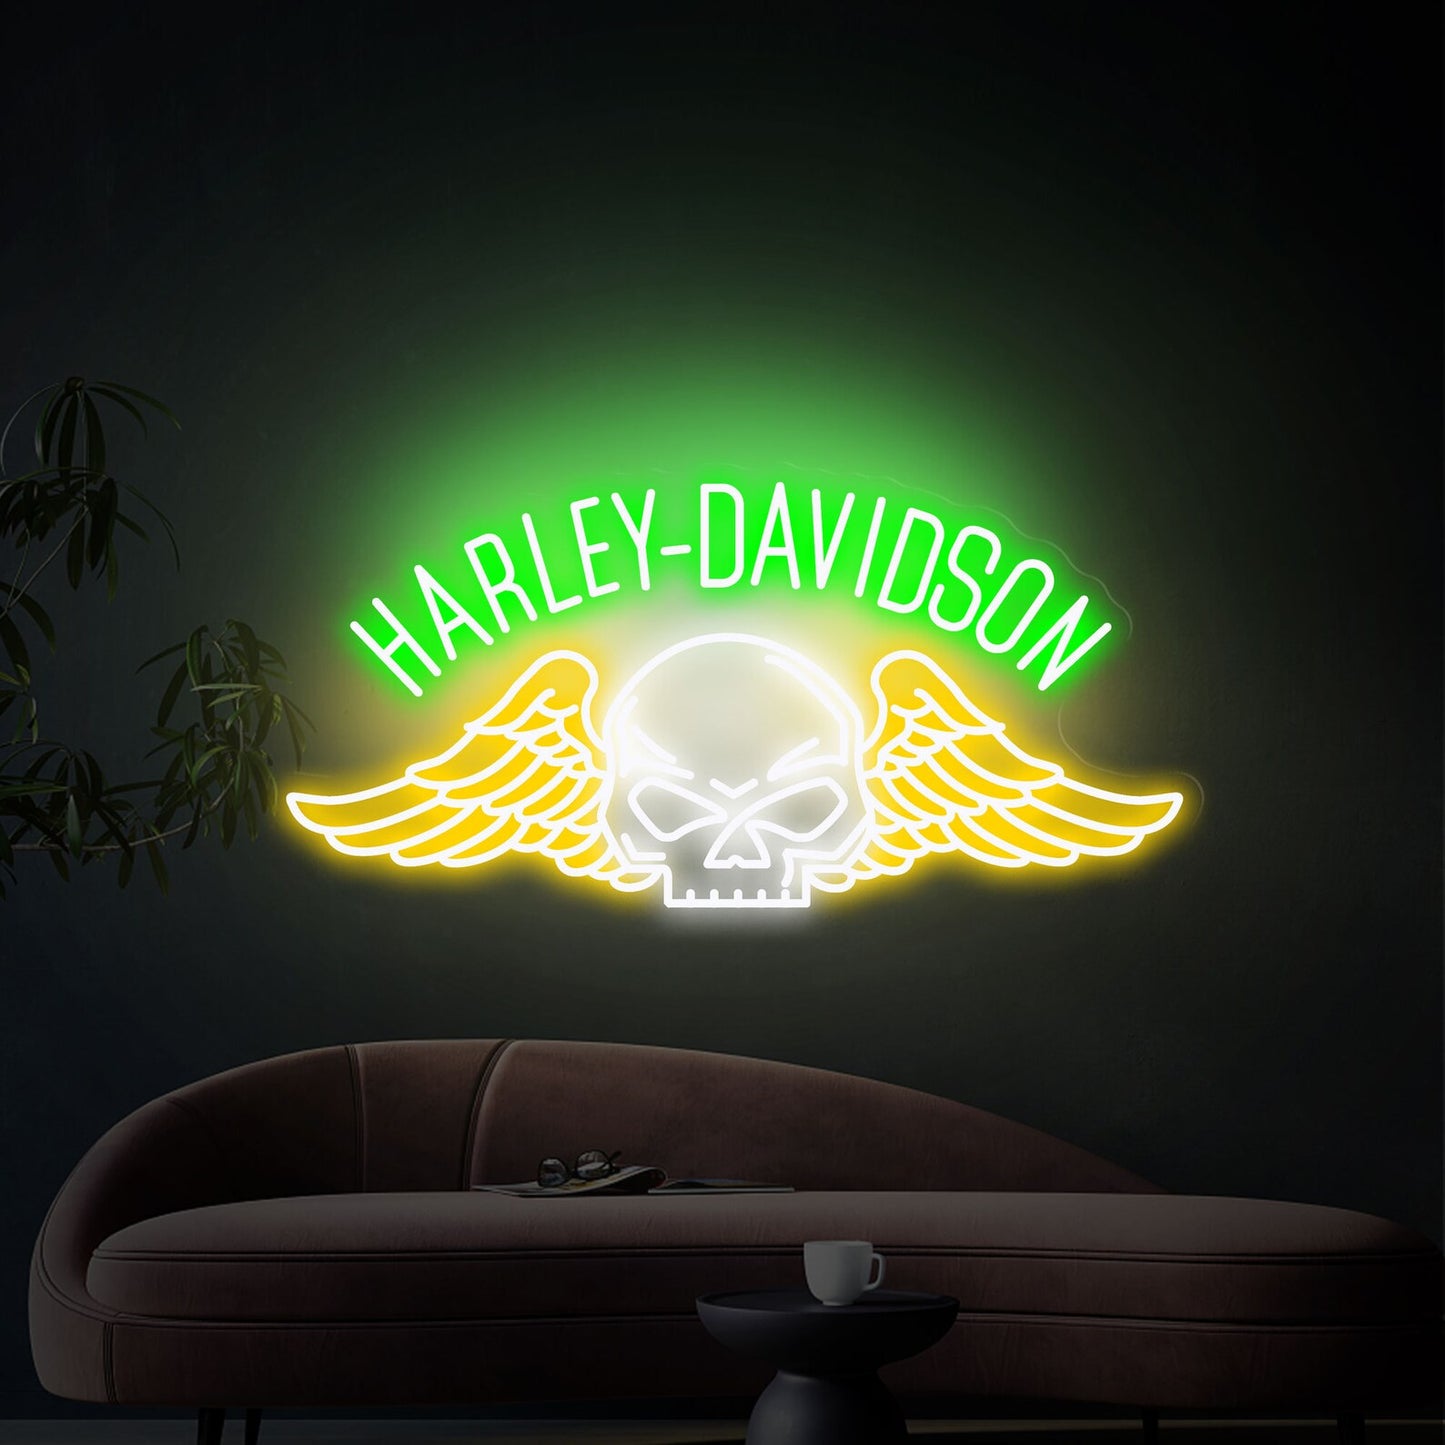 Authentic Harley Davidson Neon Sign - NeonTitle